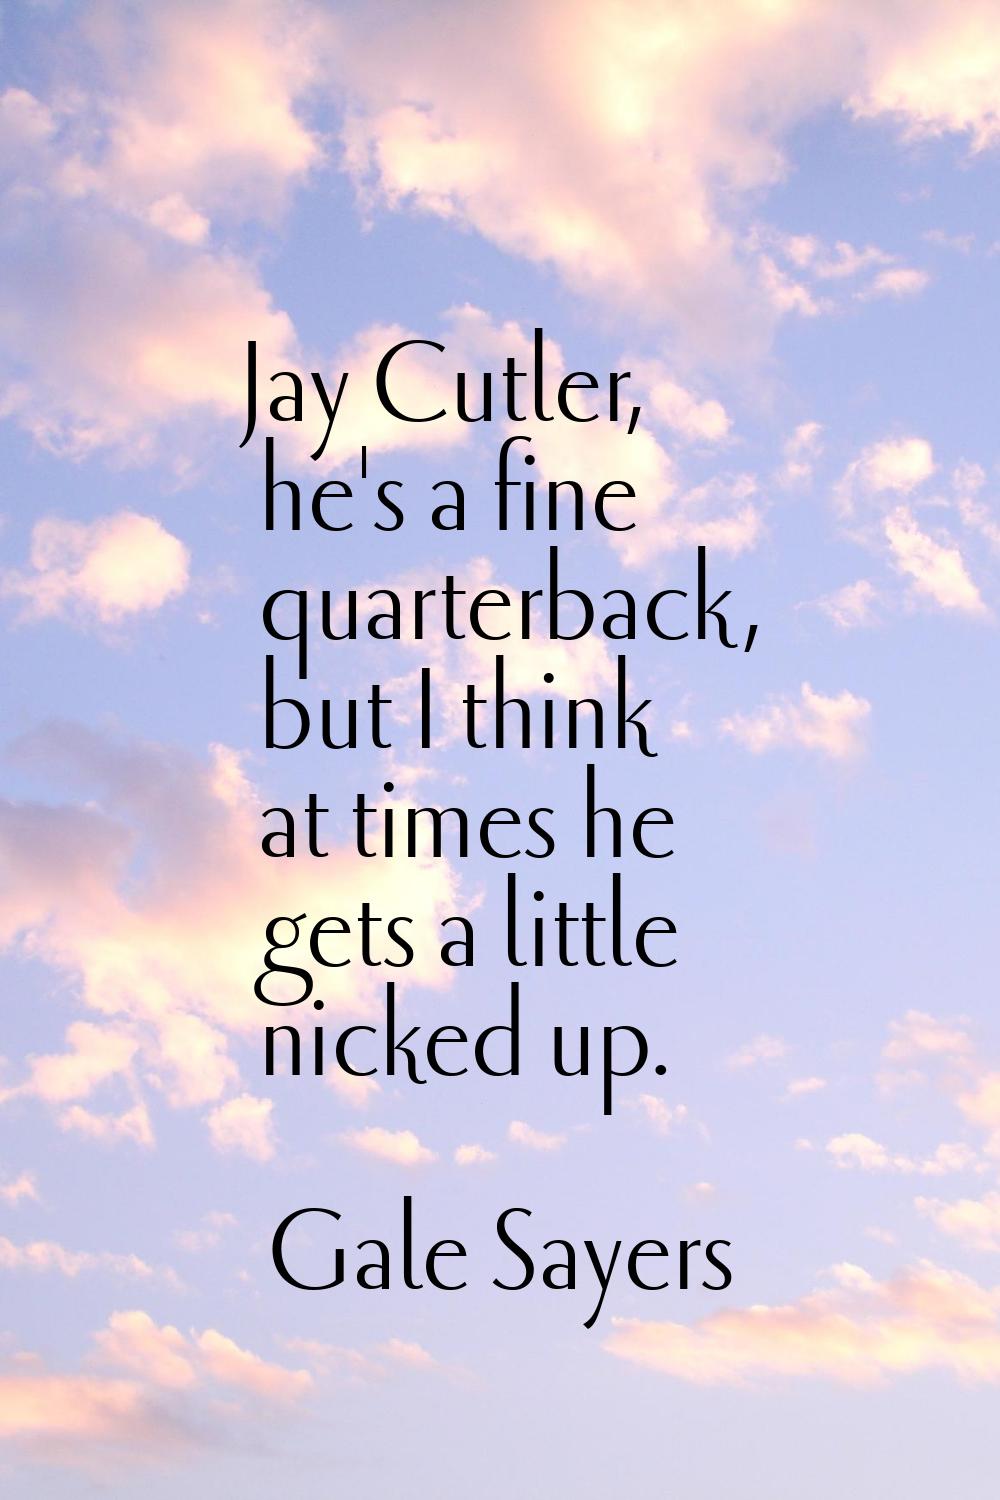 Jay Cutler, he's a fine quarterback, but I think at times he gets a little nicked up.